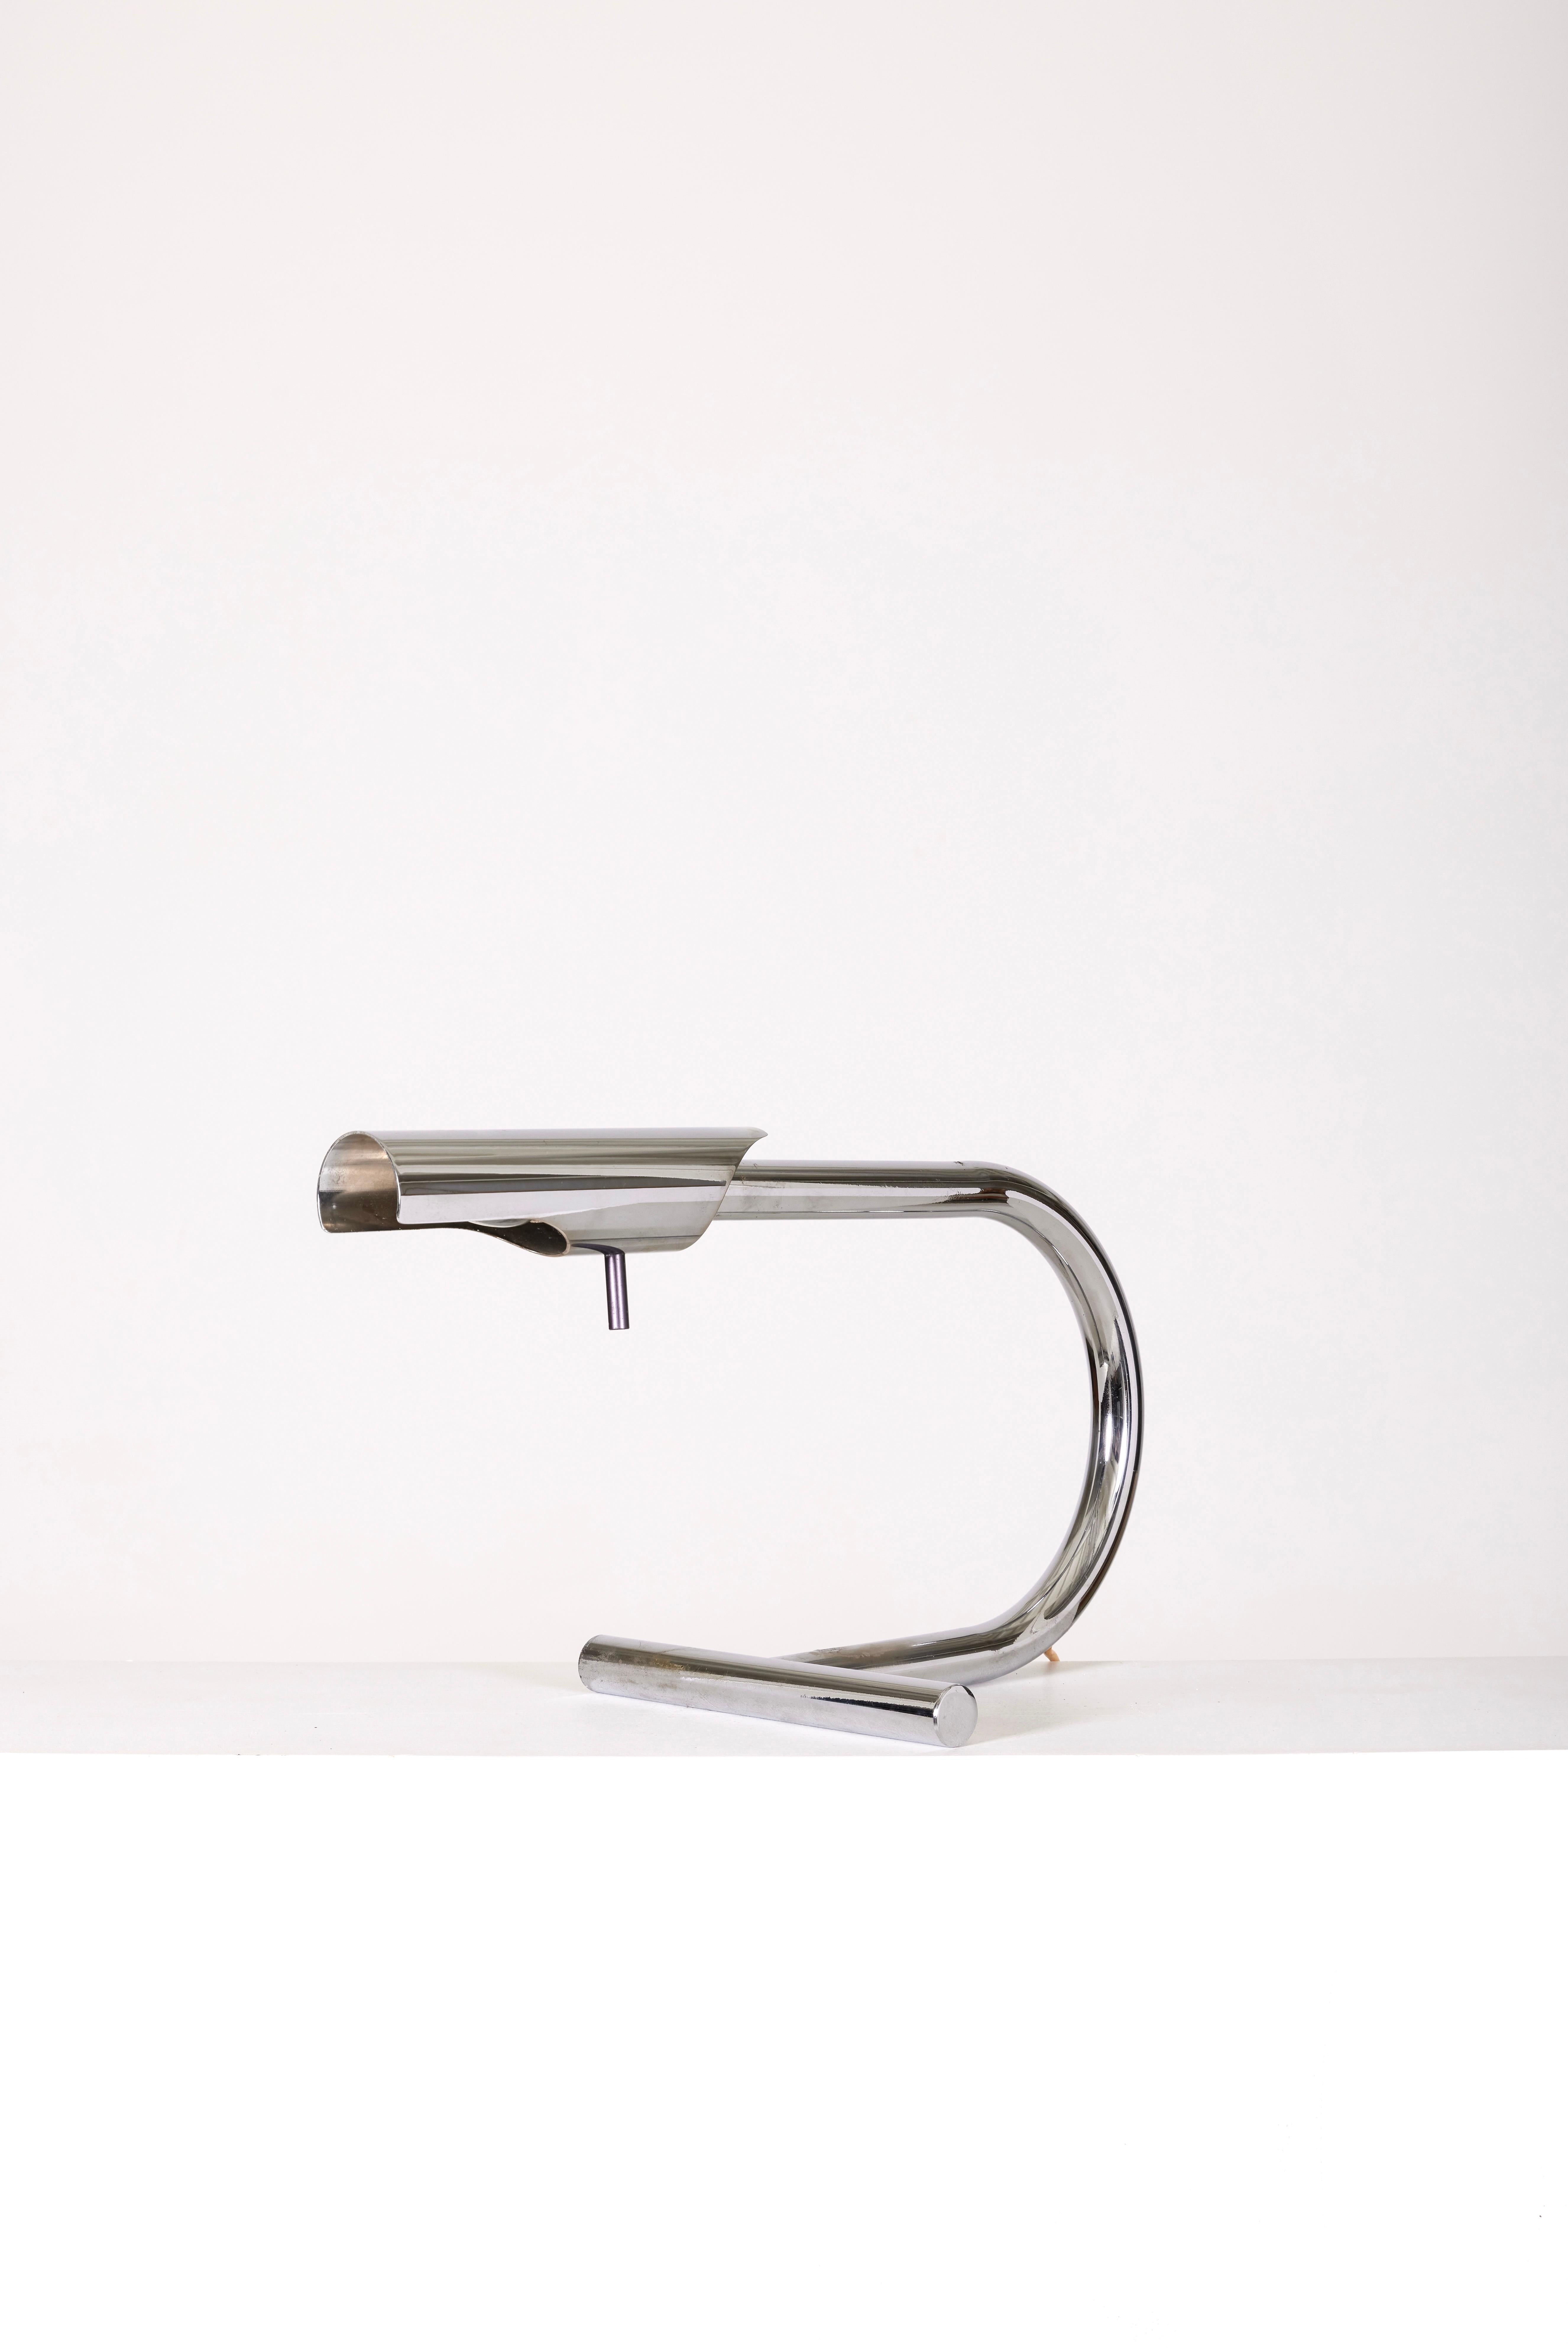 Chrome metal desk lamp by designer Etienne Fermigier for Disderot, from the 1970s. Wear marks visible in the photos should be noted.
LP1268